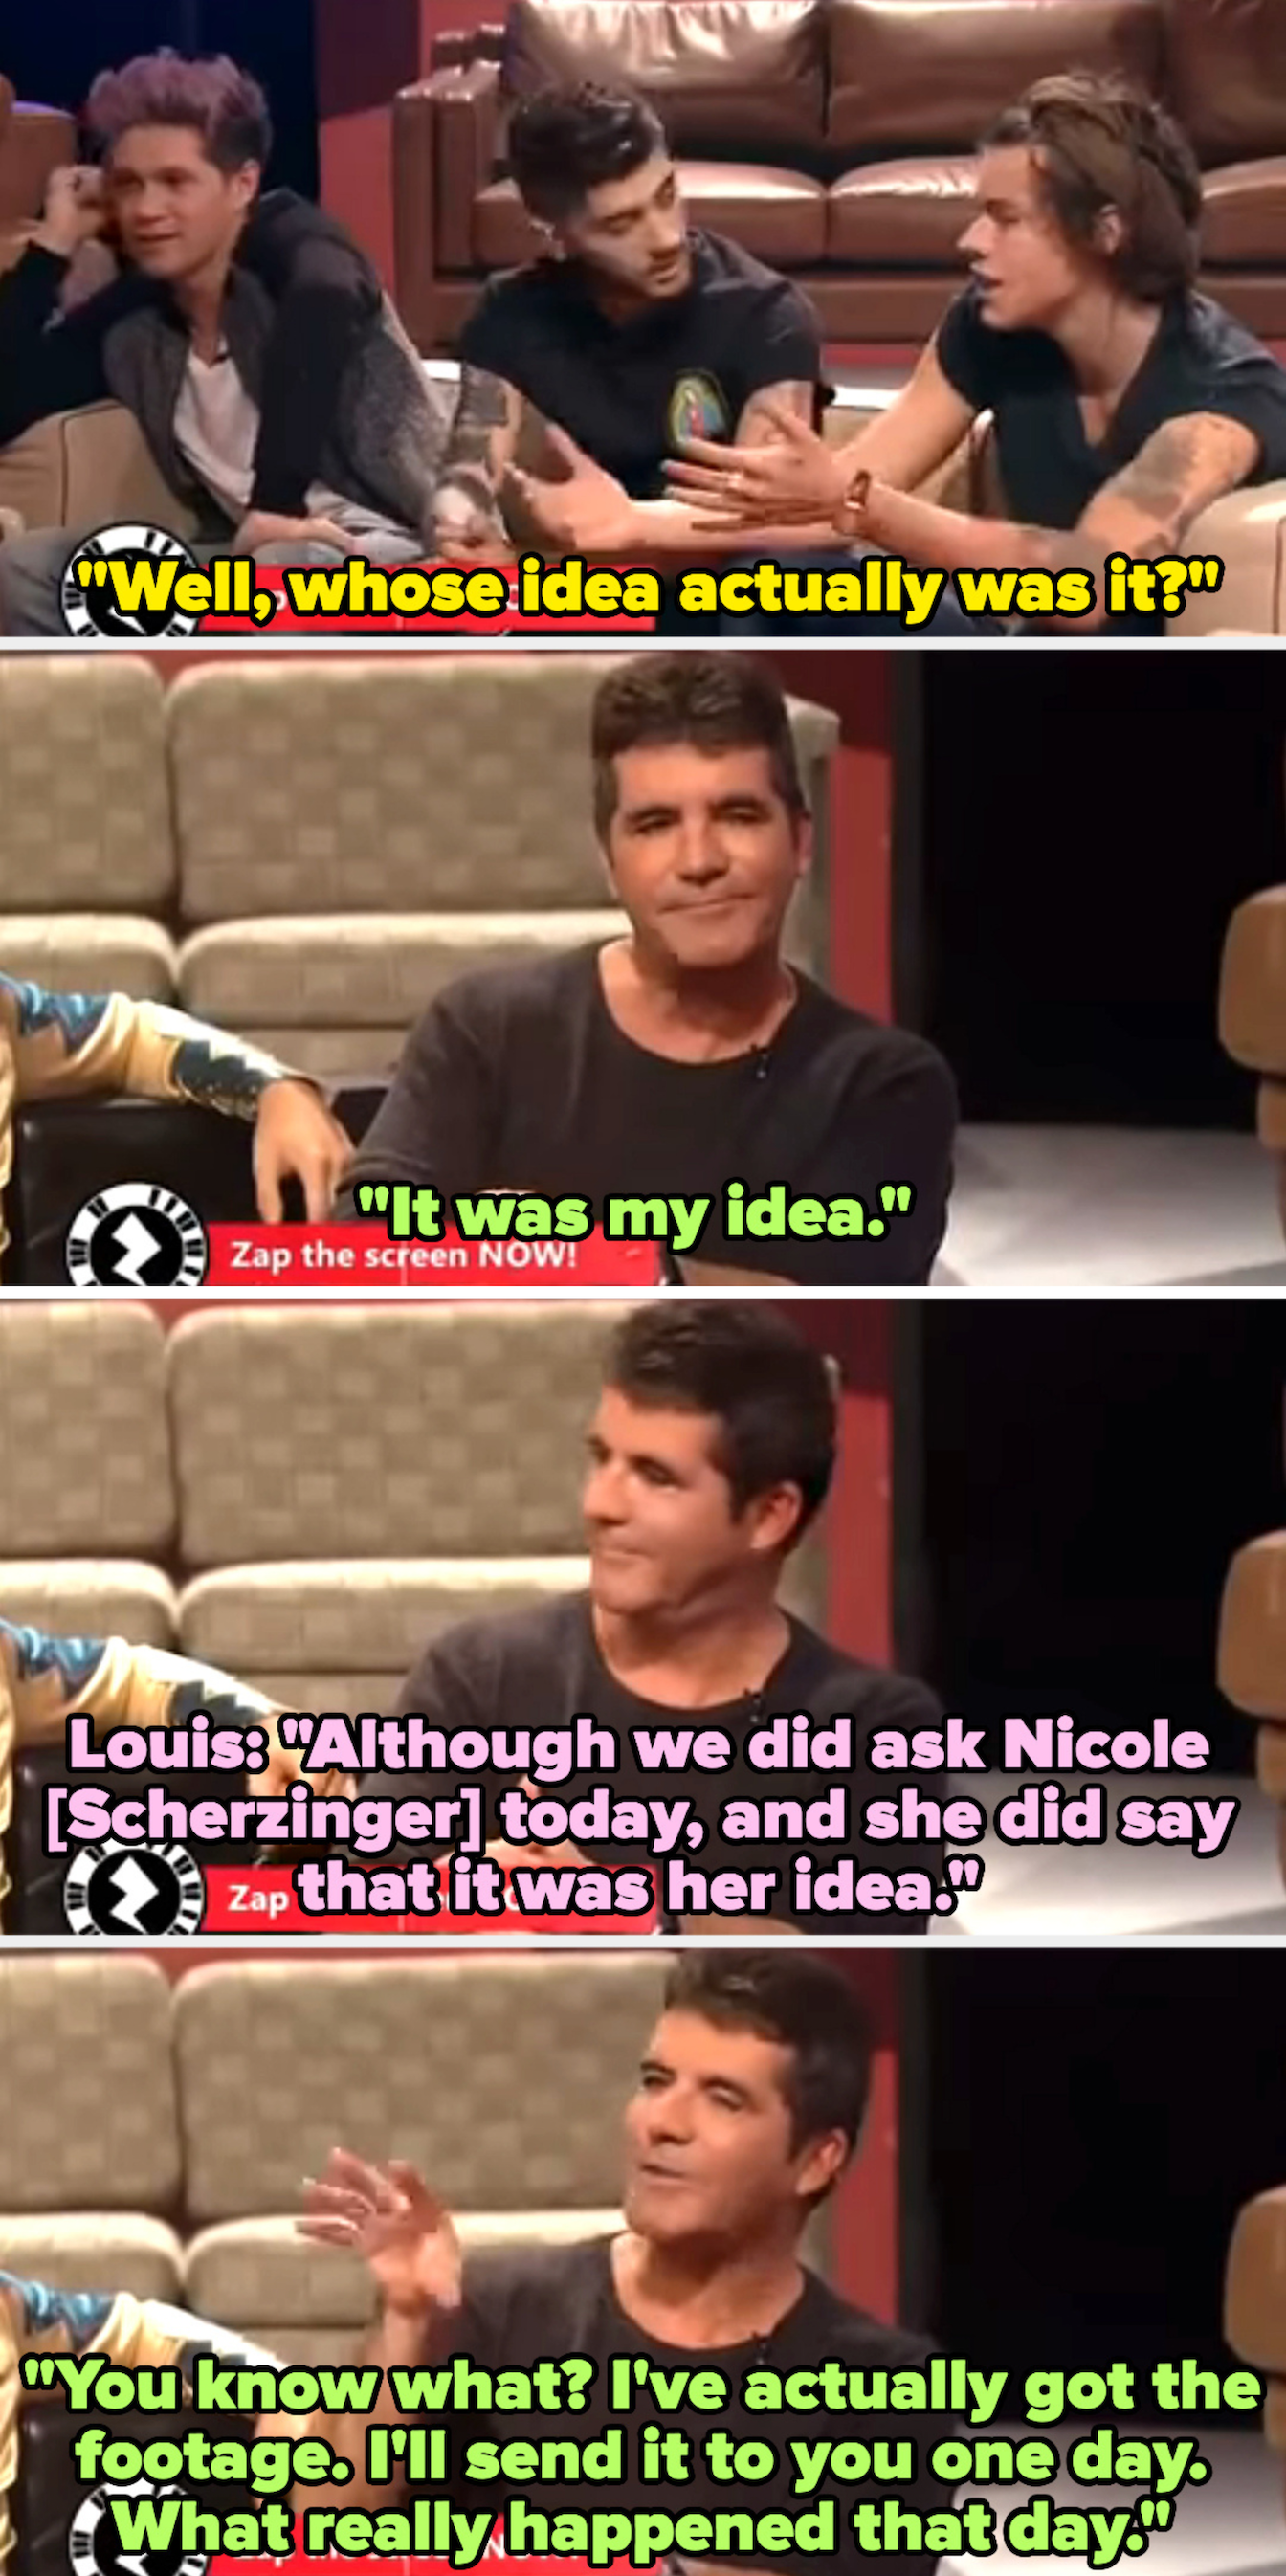 Simon takes credit, then when Louis says Nicole Scherzinger told them it was her idea, Simon says he has the actual footage and will send it to them